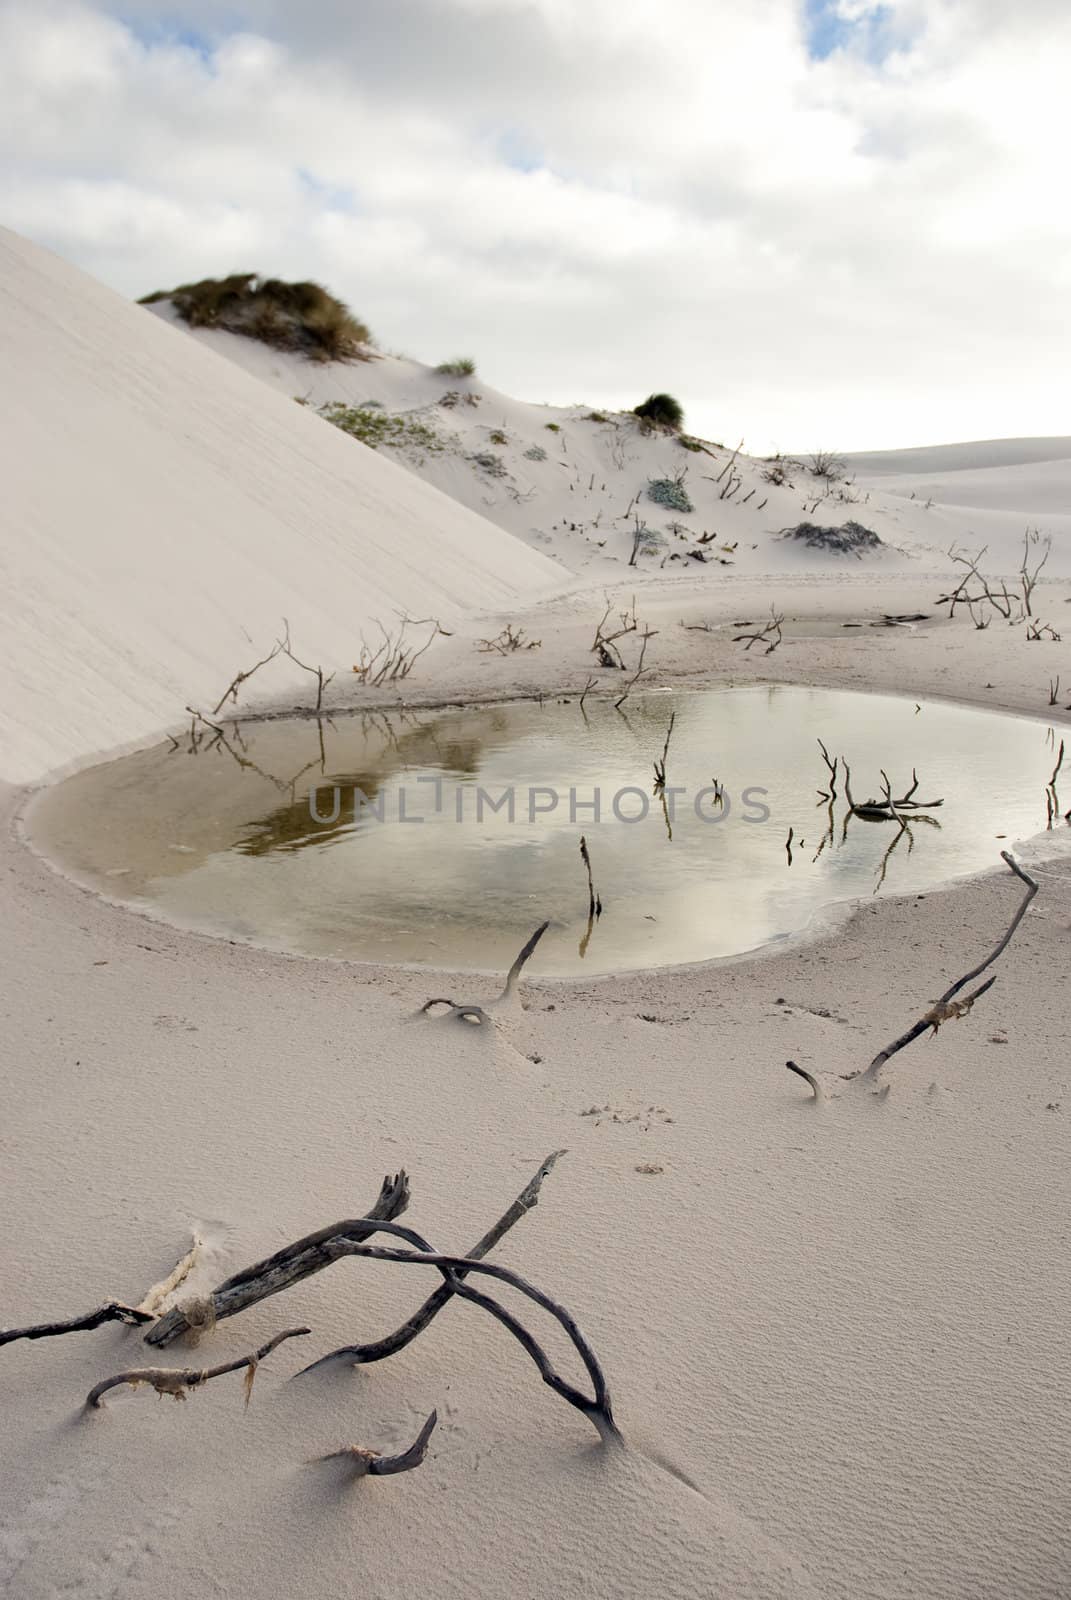 Small pond in desert scene, at the foot of a dune, with cloudy skies above